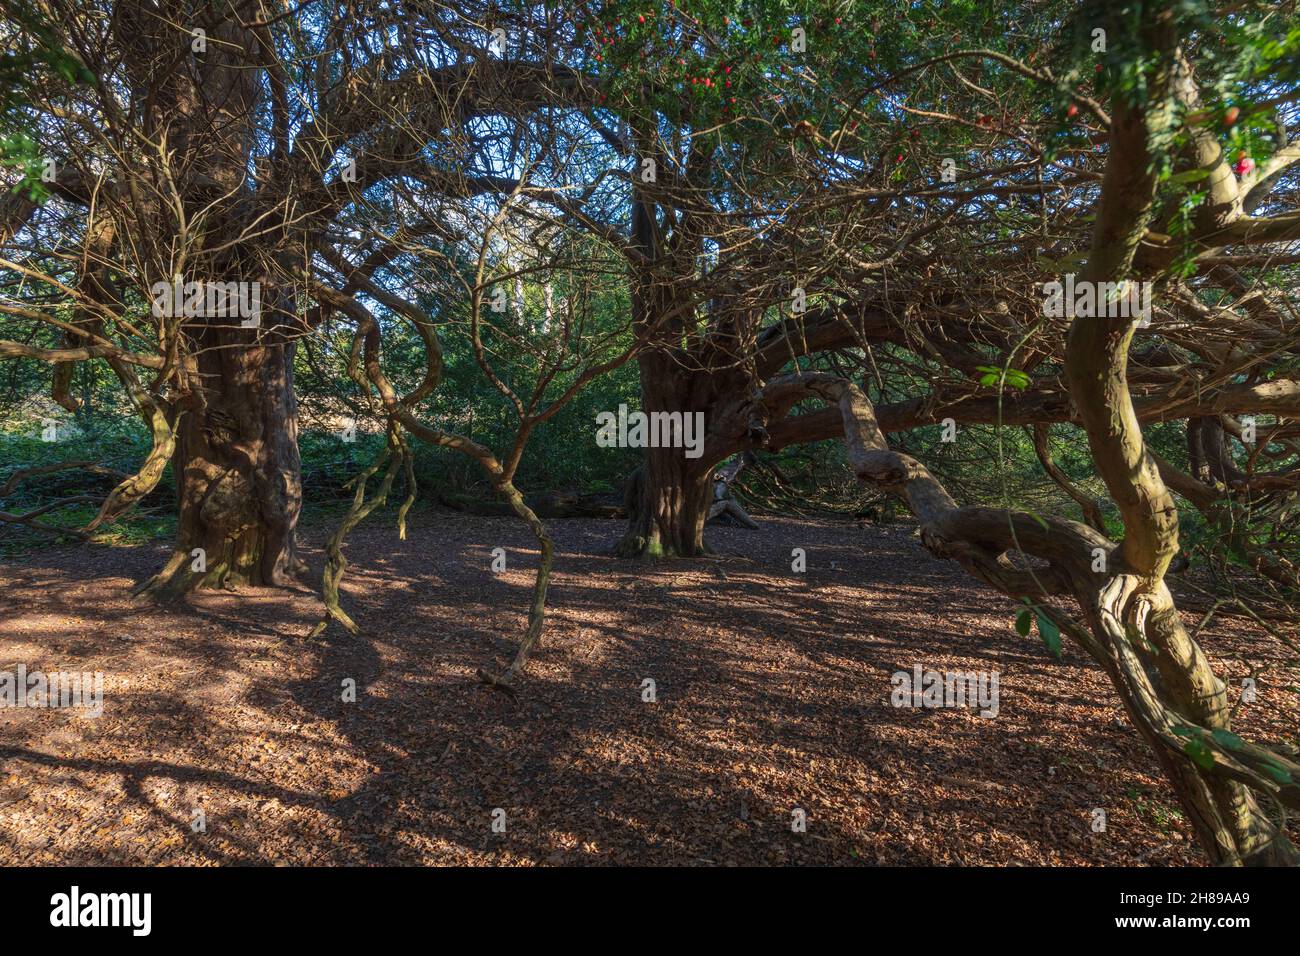 The sprawling branches of Yew Trees in Kingley Vale Nature reserve, West Sussex. Stock Photo